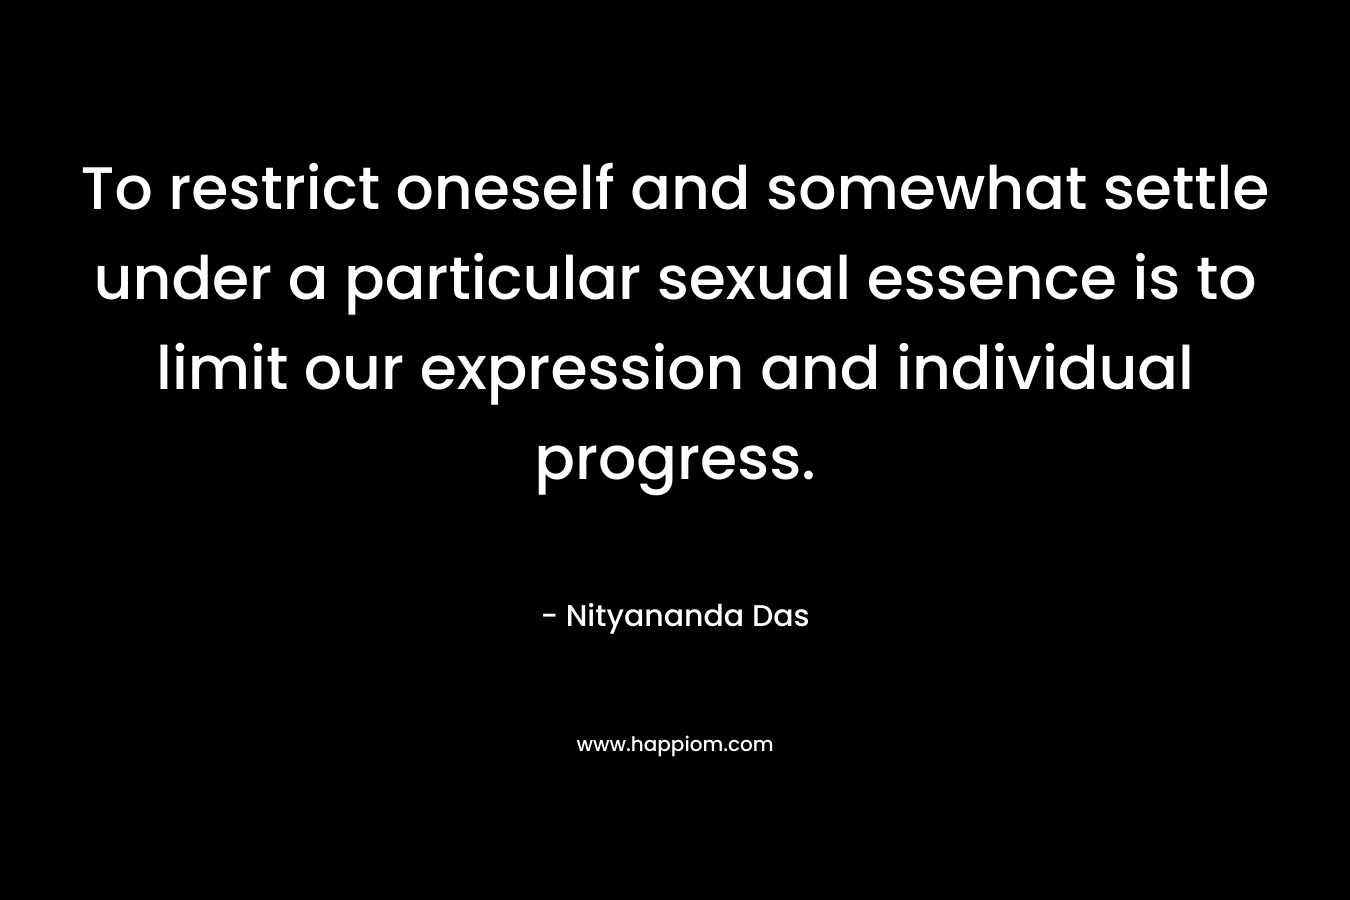 To restrict oneself and somewhat settle under a particular sexual essence is to limit our expression and individual progress.